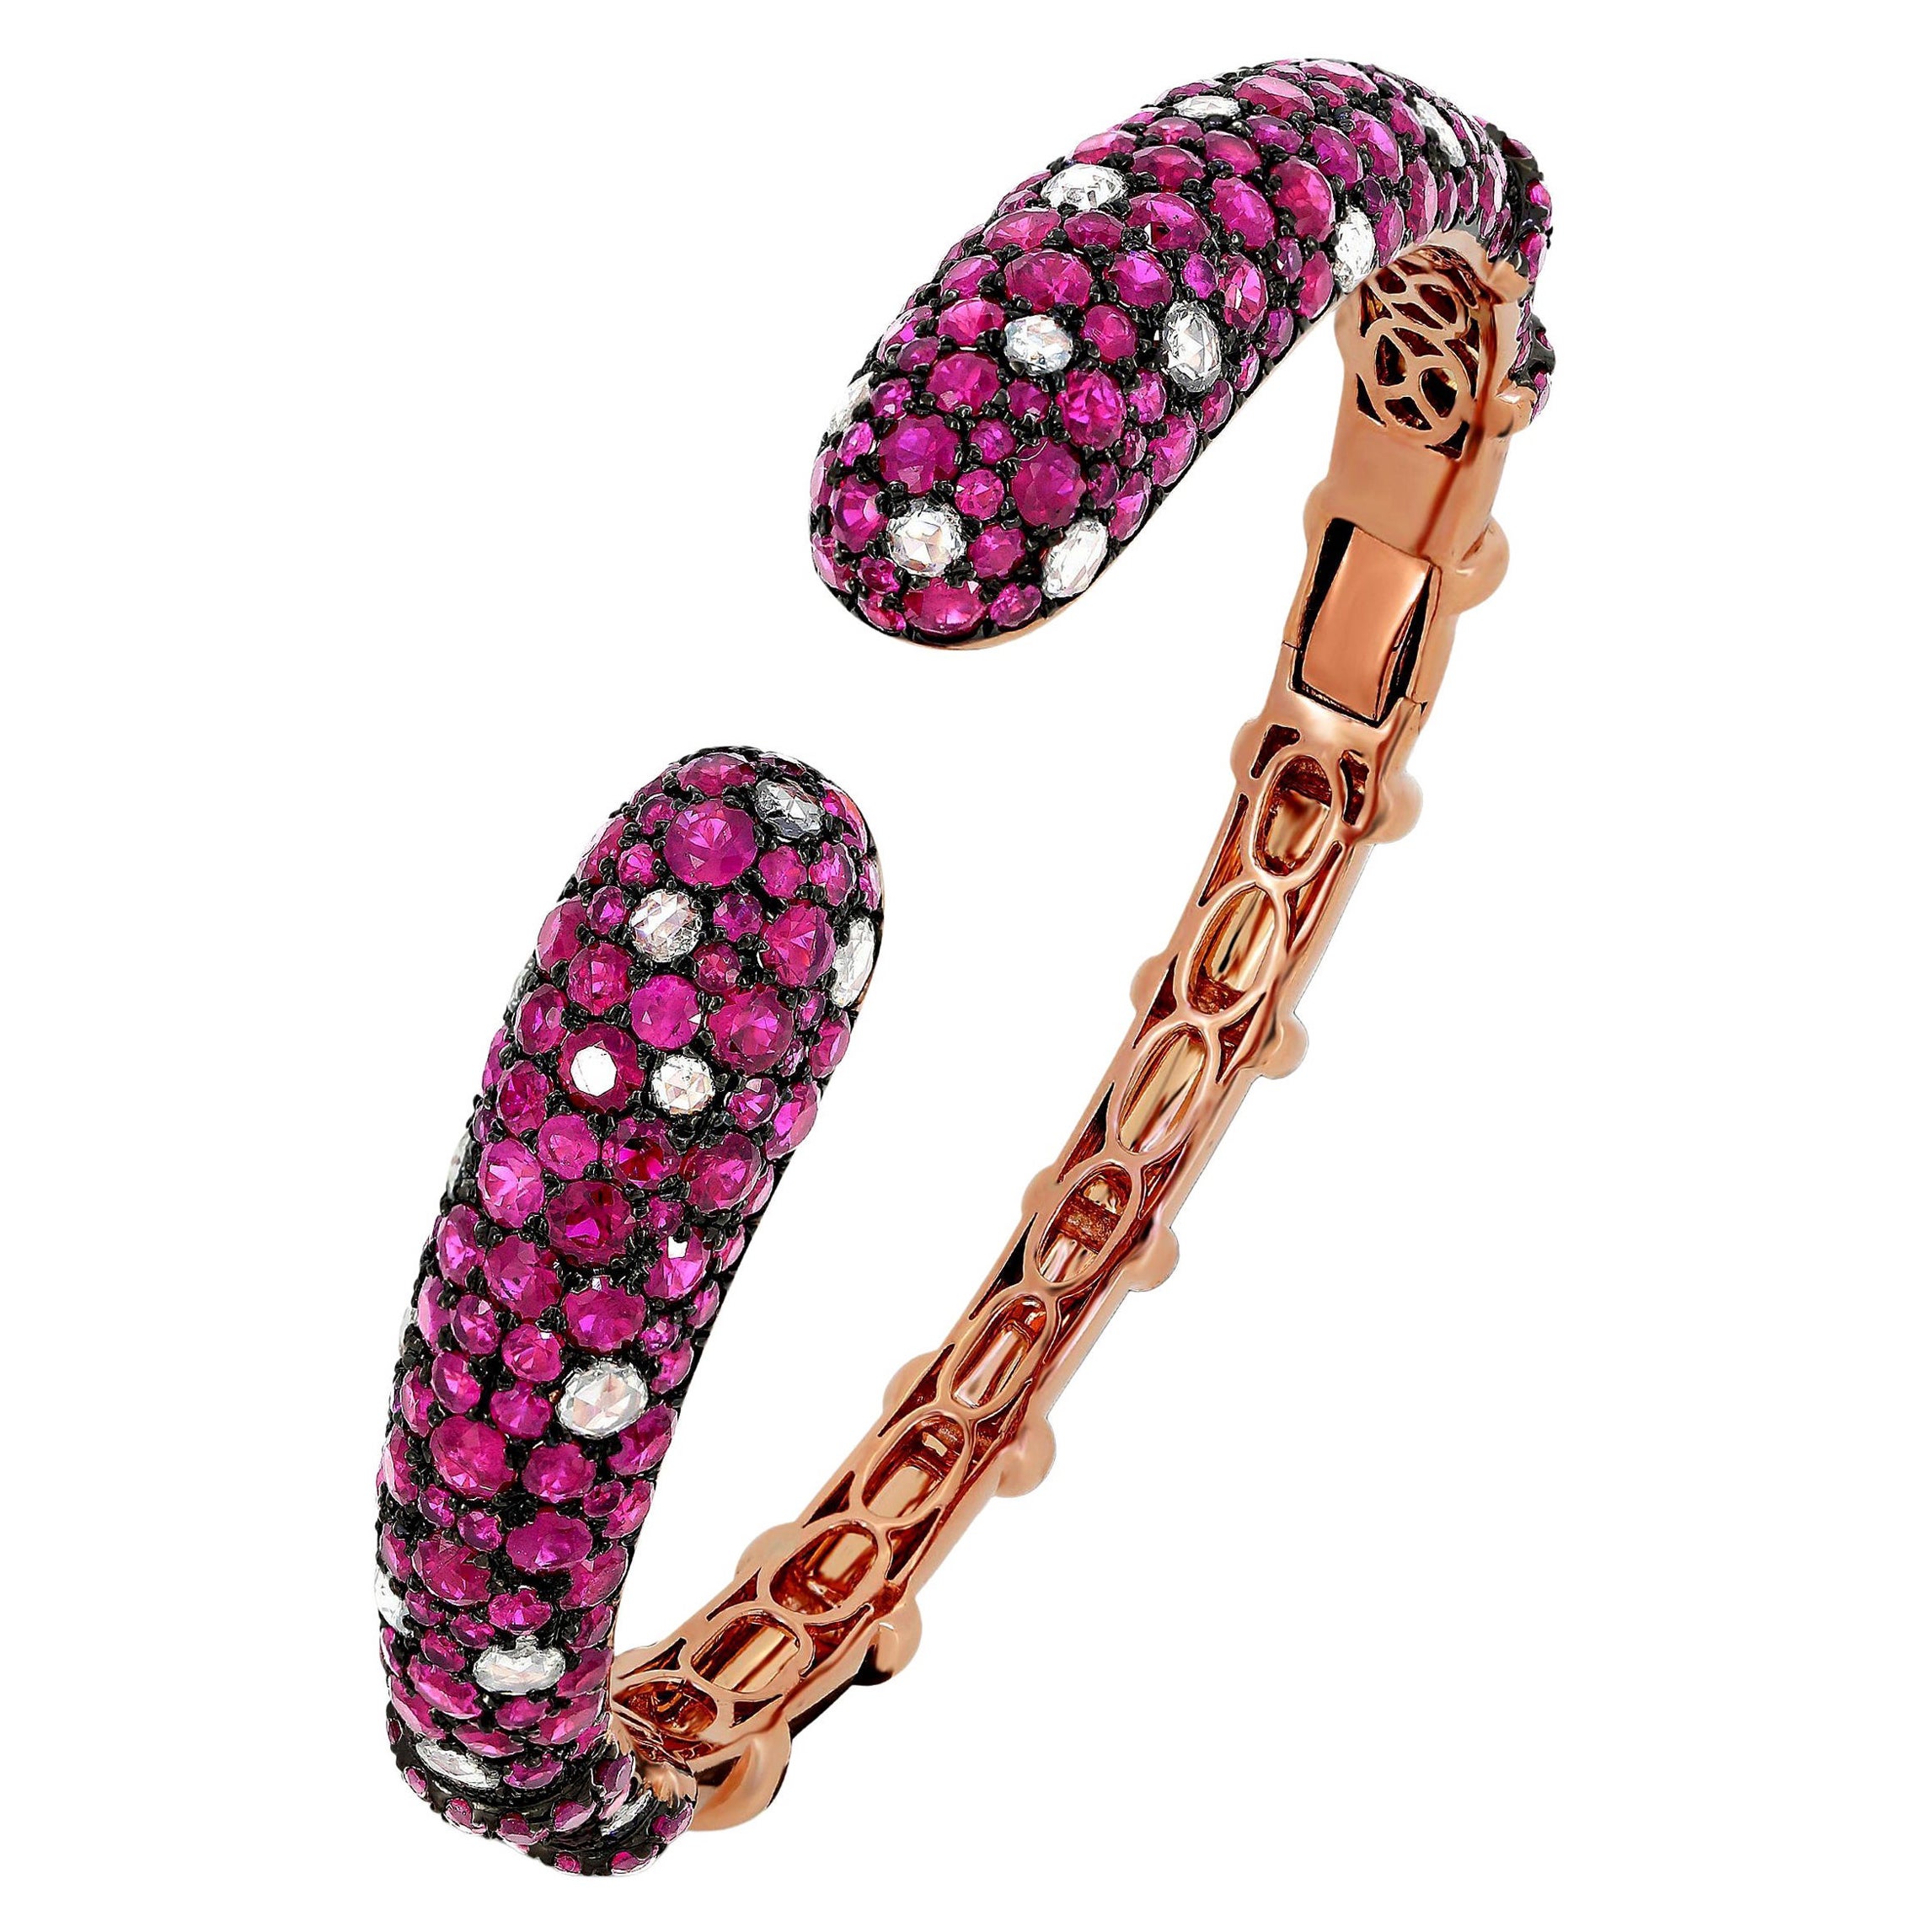 Nigaam 12.81 Cts. Ruby and 1.45 Cts. Diamond Cuff Bangle in 18K Rose Gold